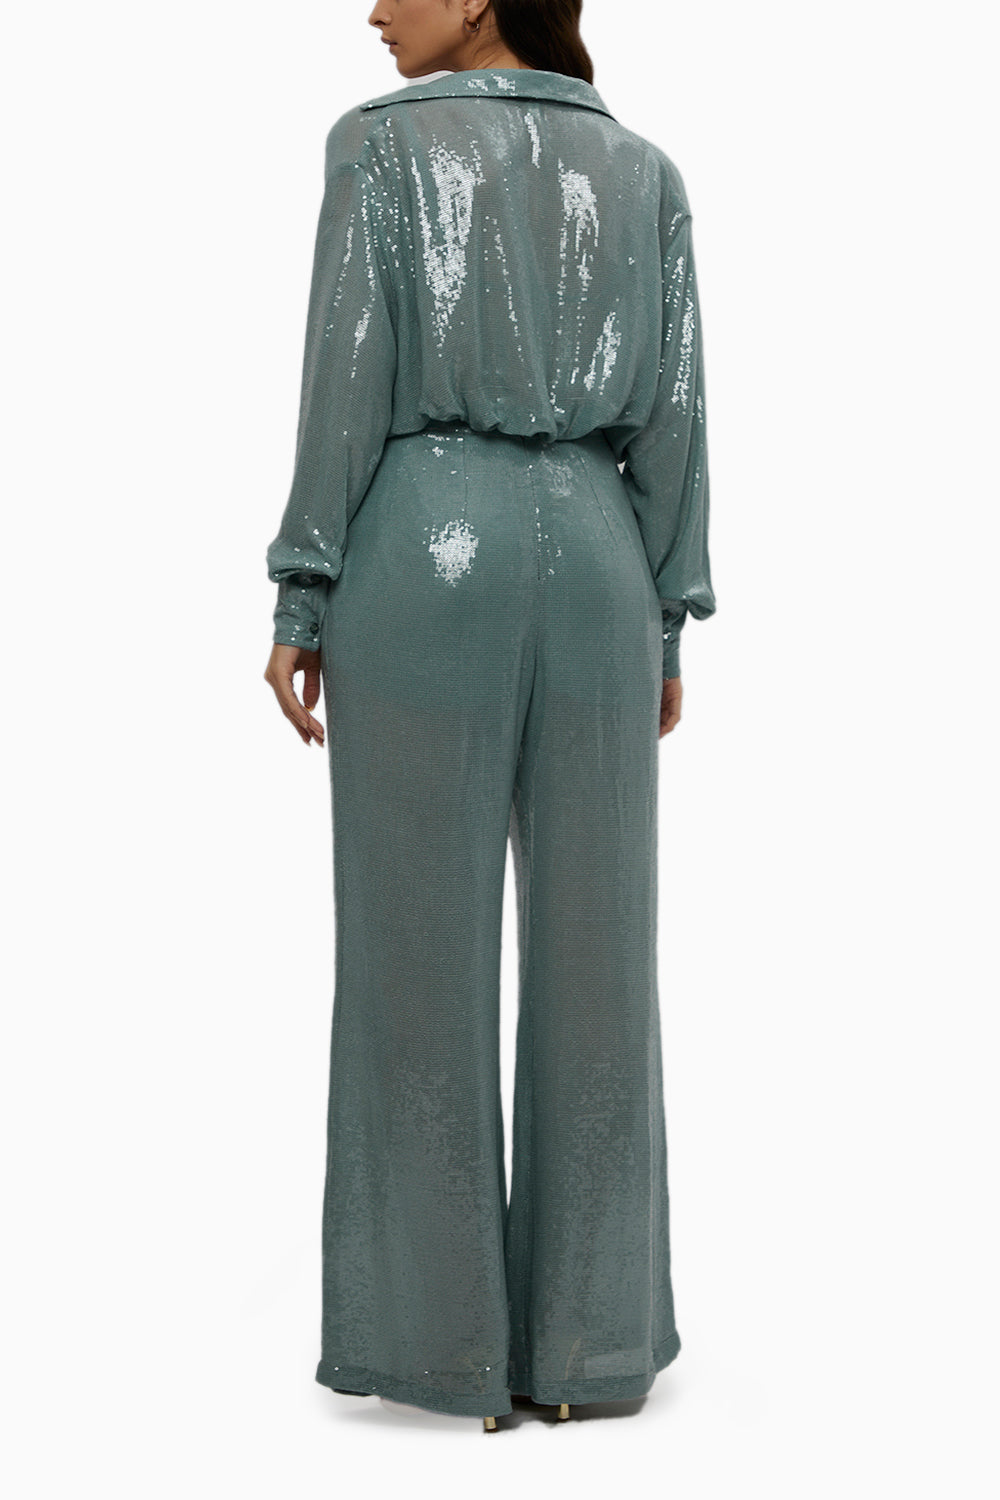 Teal Sequinned Shirt And Bralette Pants